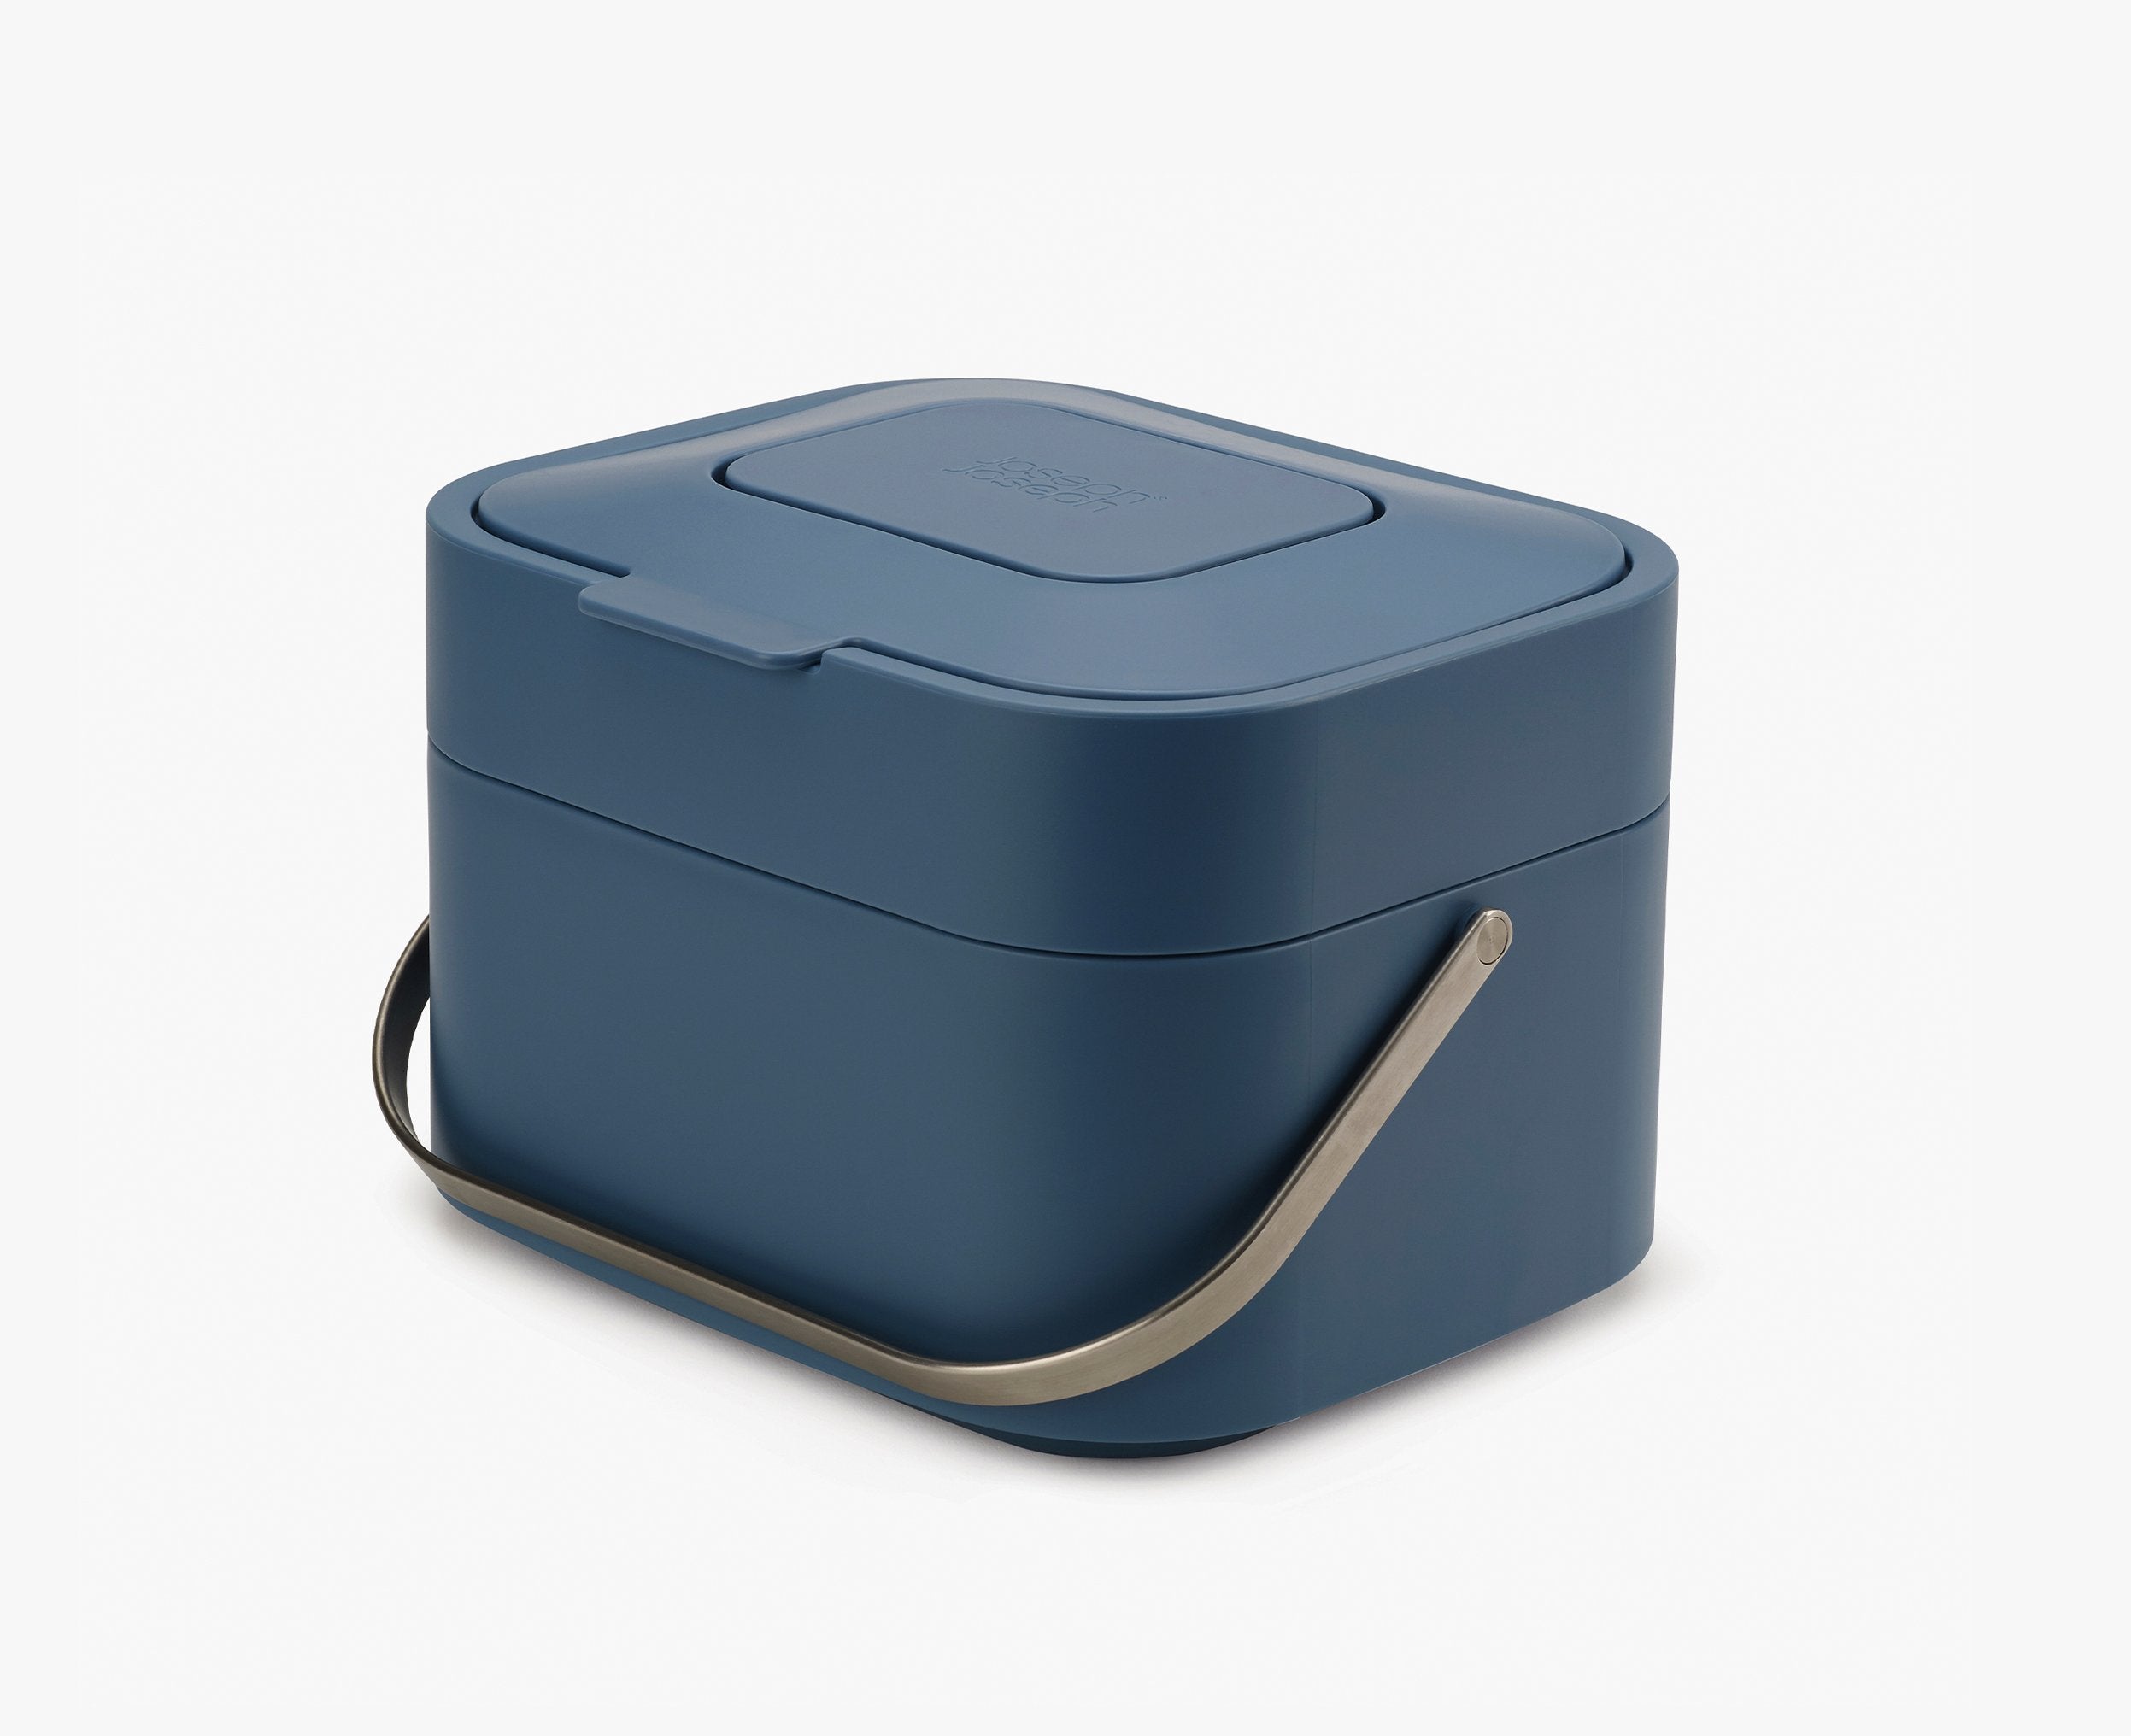 BEON.COM.AU  Our on-trend Editions colour way is now available in our Stack Food Waste Caddy. The unique ventilated design of this food waste caddy helps to reduce unpleasant odours from decomposing food.  Ventilated design reduces moisture and odours Replaceable odour filter in lid Easy-access flip-top lid ... Joseph Joseph at BEON.COM.AU